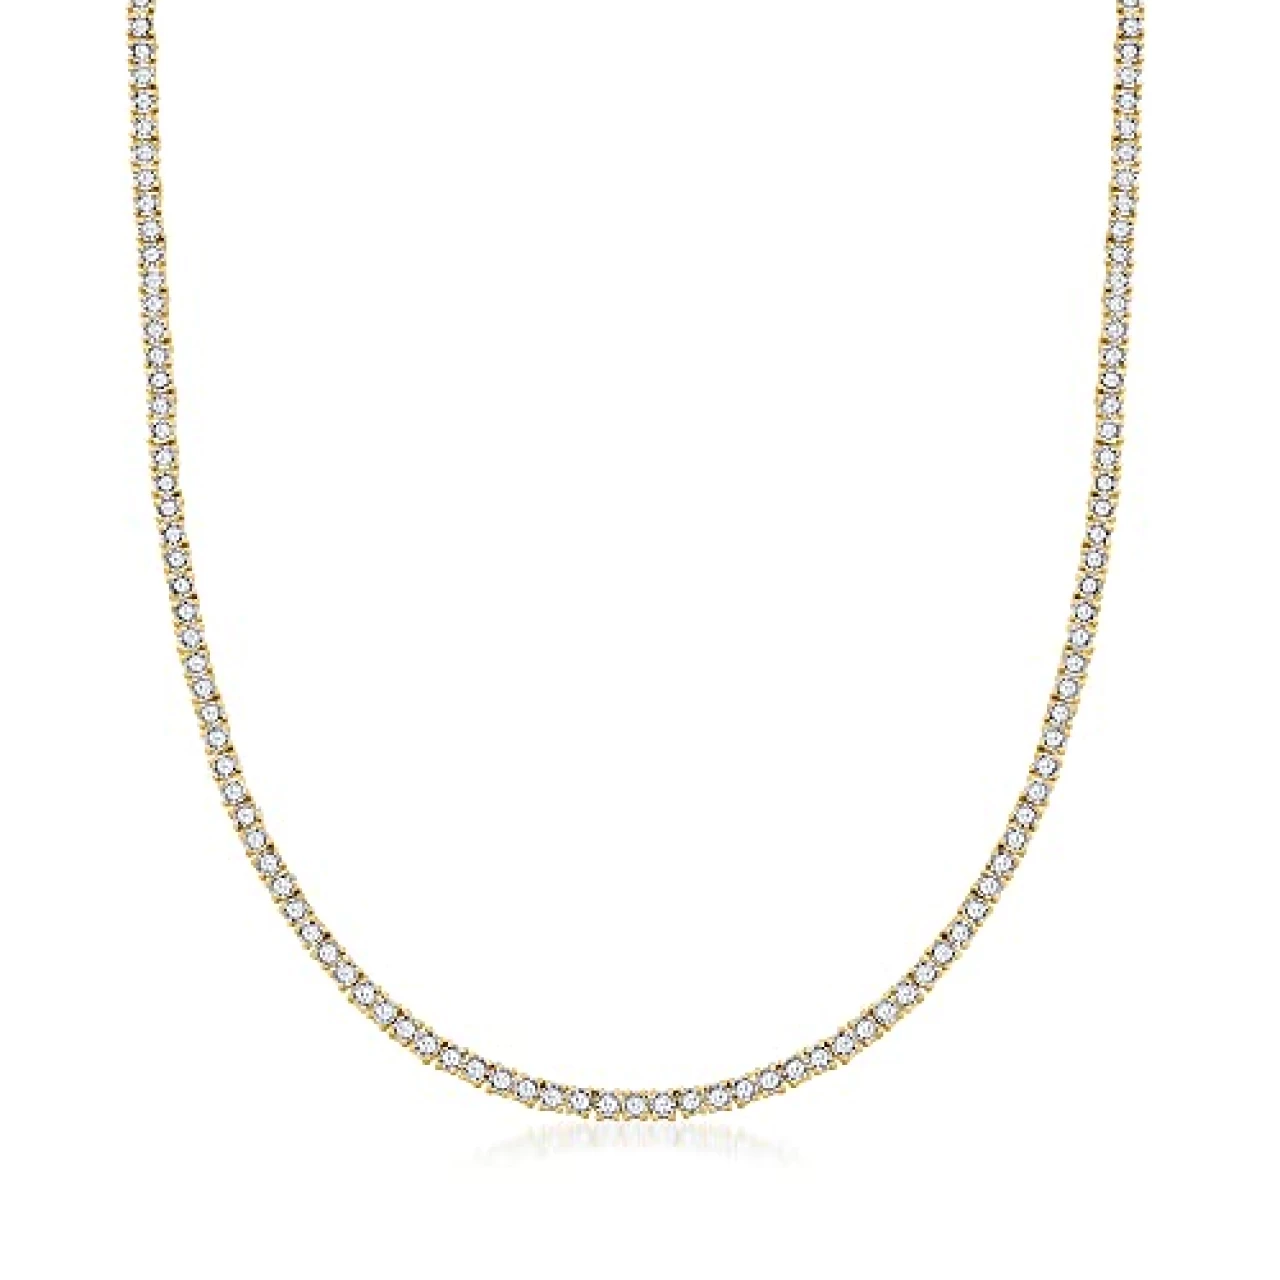 Ross-Simons 6.20 ct. t.w. Diamond Tennis Necklace in 18kt Gold Over Sterling. 20 inches